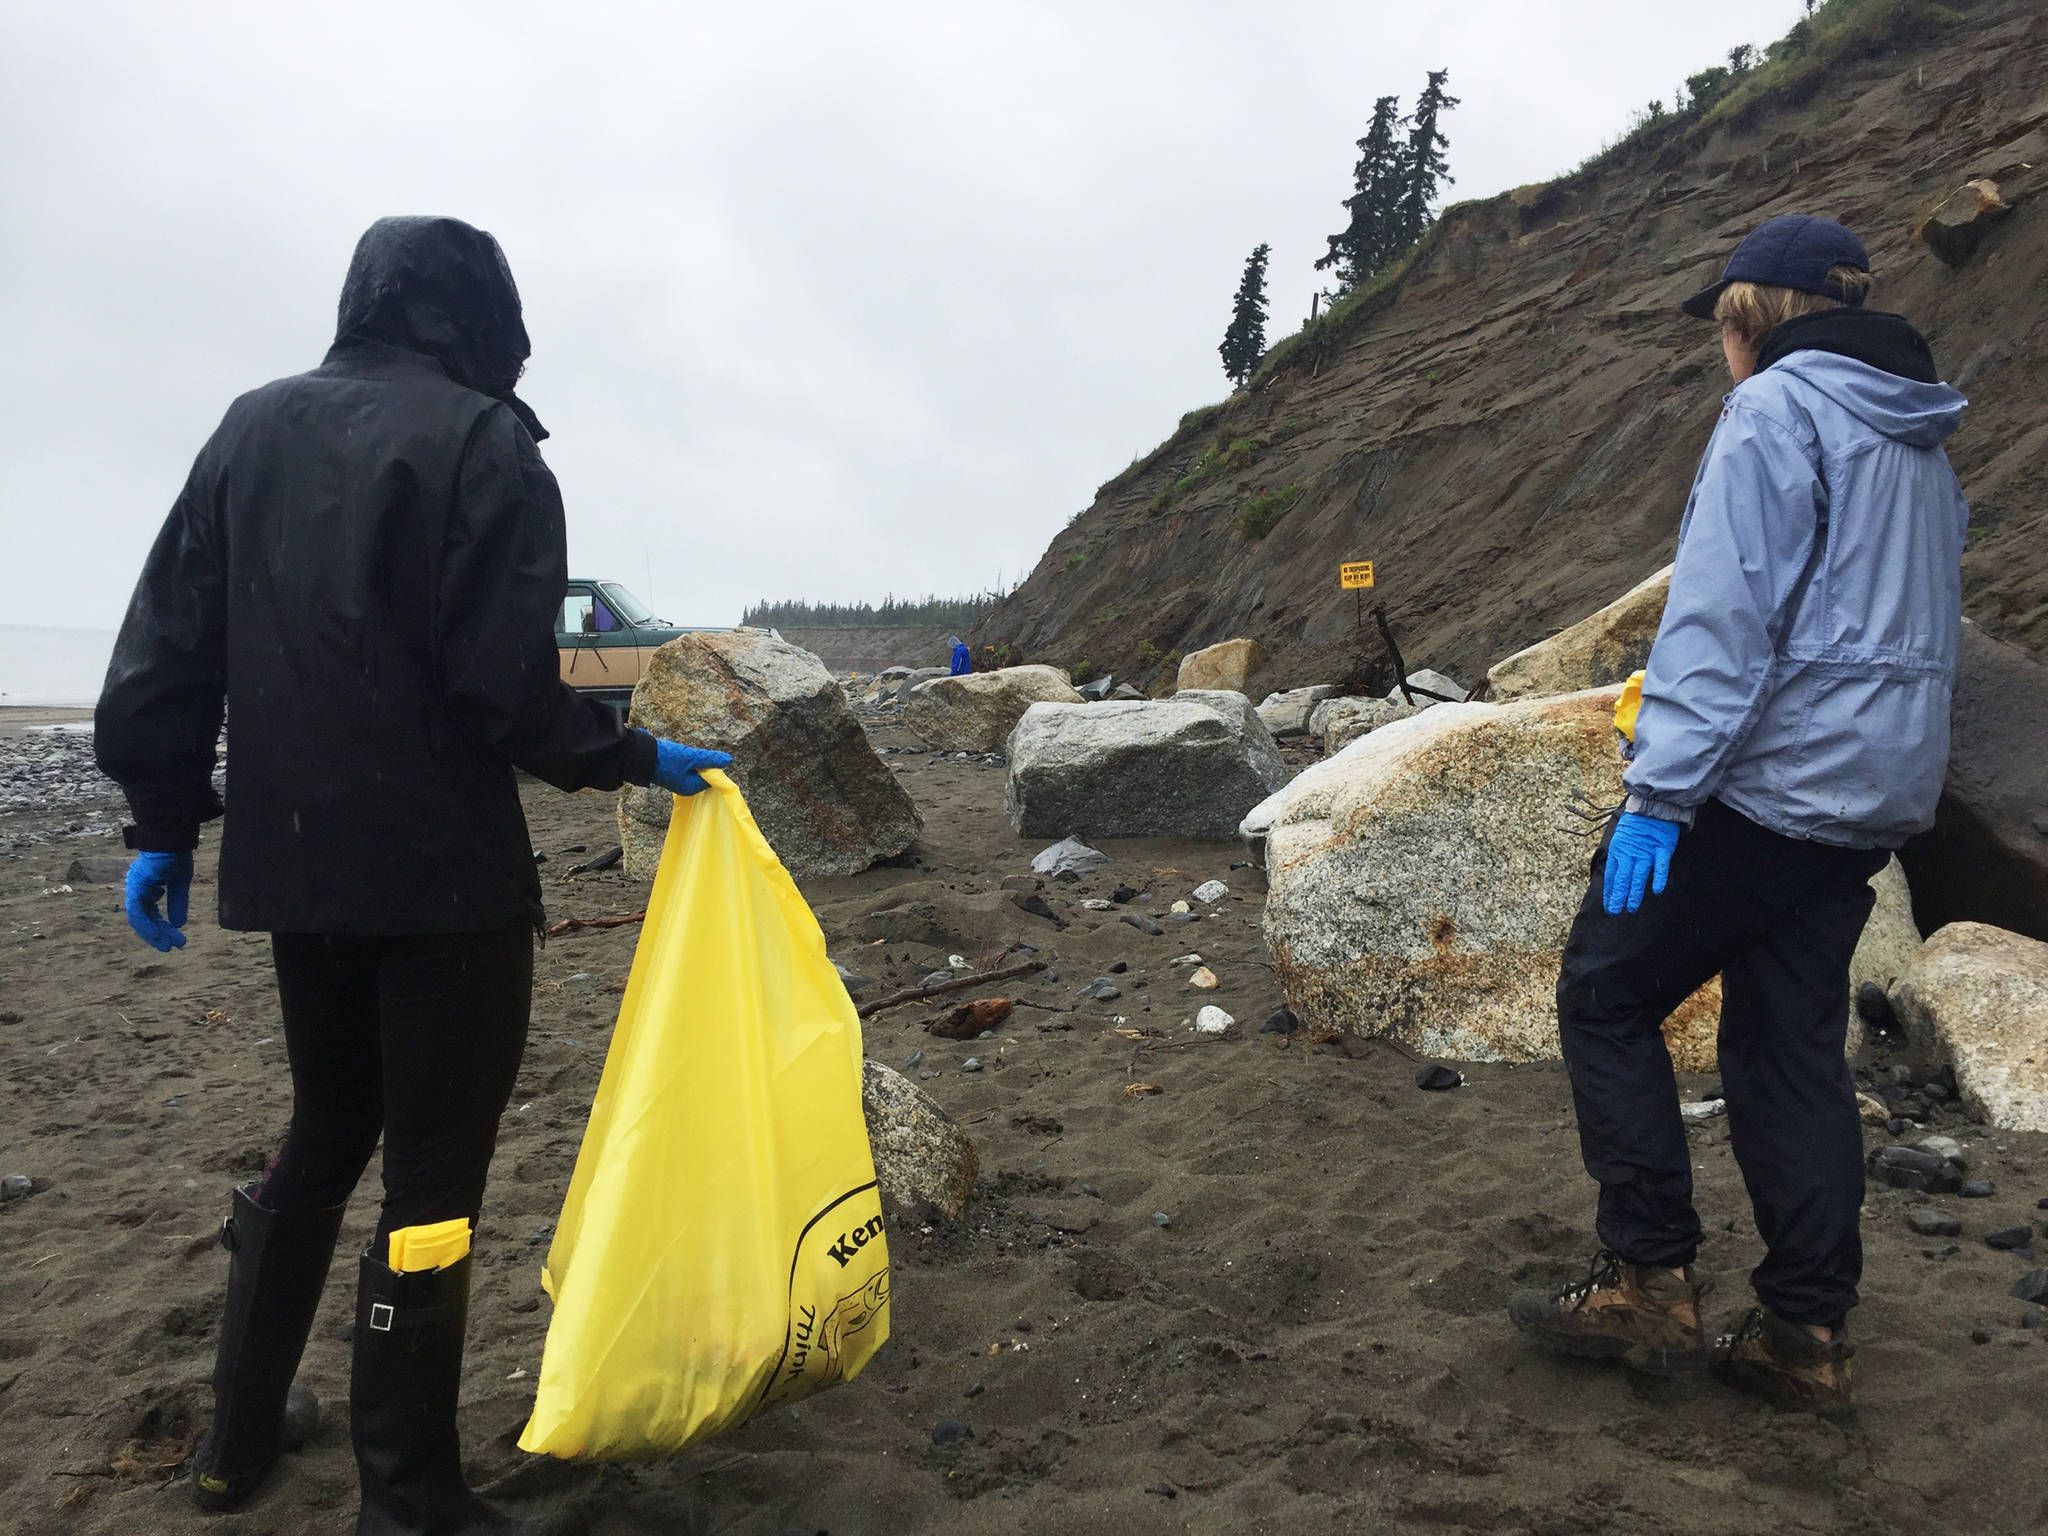 Theresa Salzetti (left) and Chris Bergholtz (right), a coach on the Kenai Central High School Cross Country Ski Team, head down the beach to clean up garbage left by personal-use dipnetters on the north Kenai Beach on Tuesday, July 18, 2017 in Kenai, Alaska. Members of the ski team helped clean up the beach Tuesday as a fundraiser for the team’s activities. (Photo by Elizabeth Earl/Peninsula Clarion)